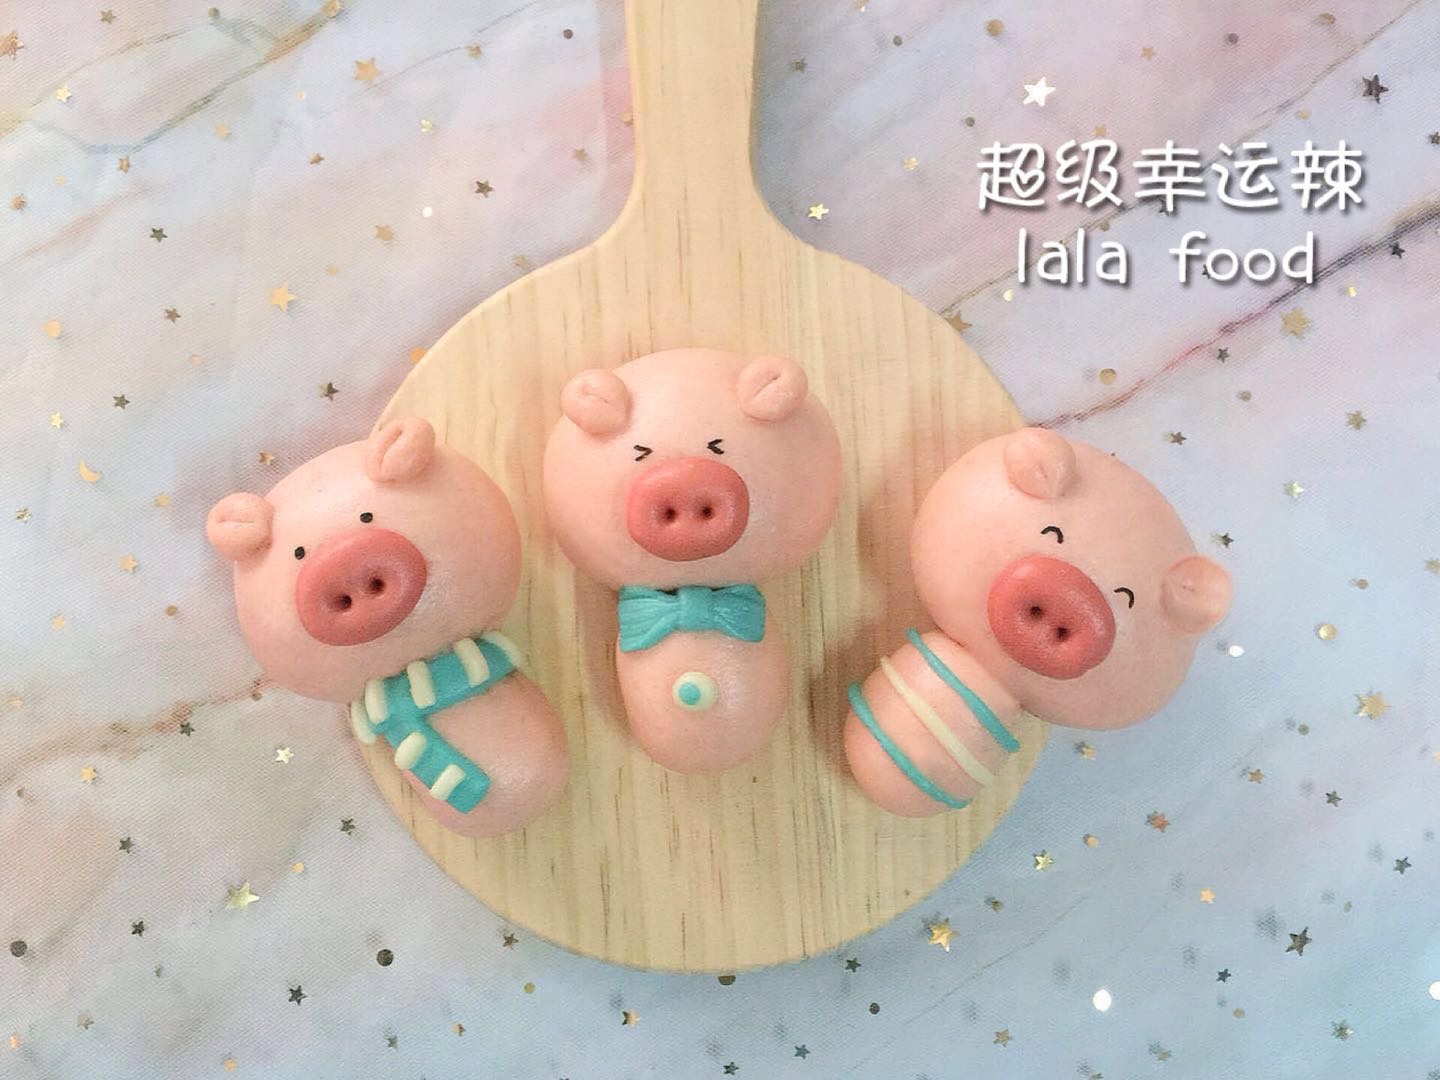 
Hot pig (achieve formerly) the practice that cartoon steamed bread exceeds detailed tutorial